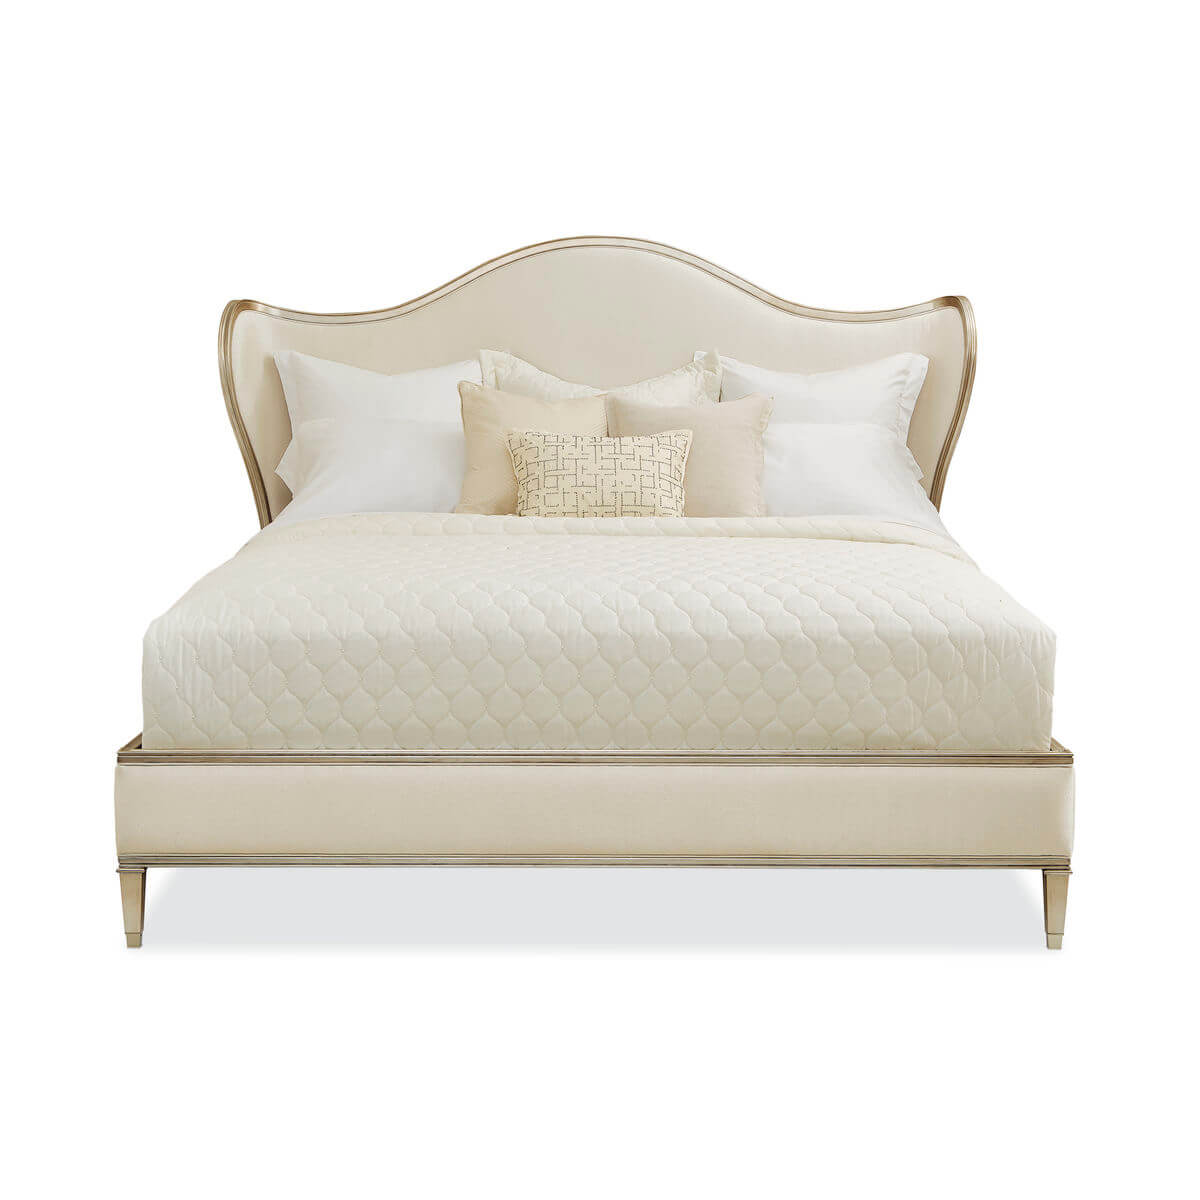 Transitional Style Upholstered Queen Bed - English Georgian America